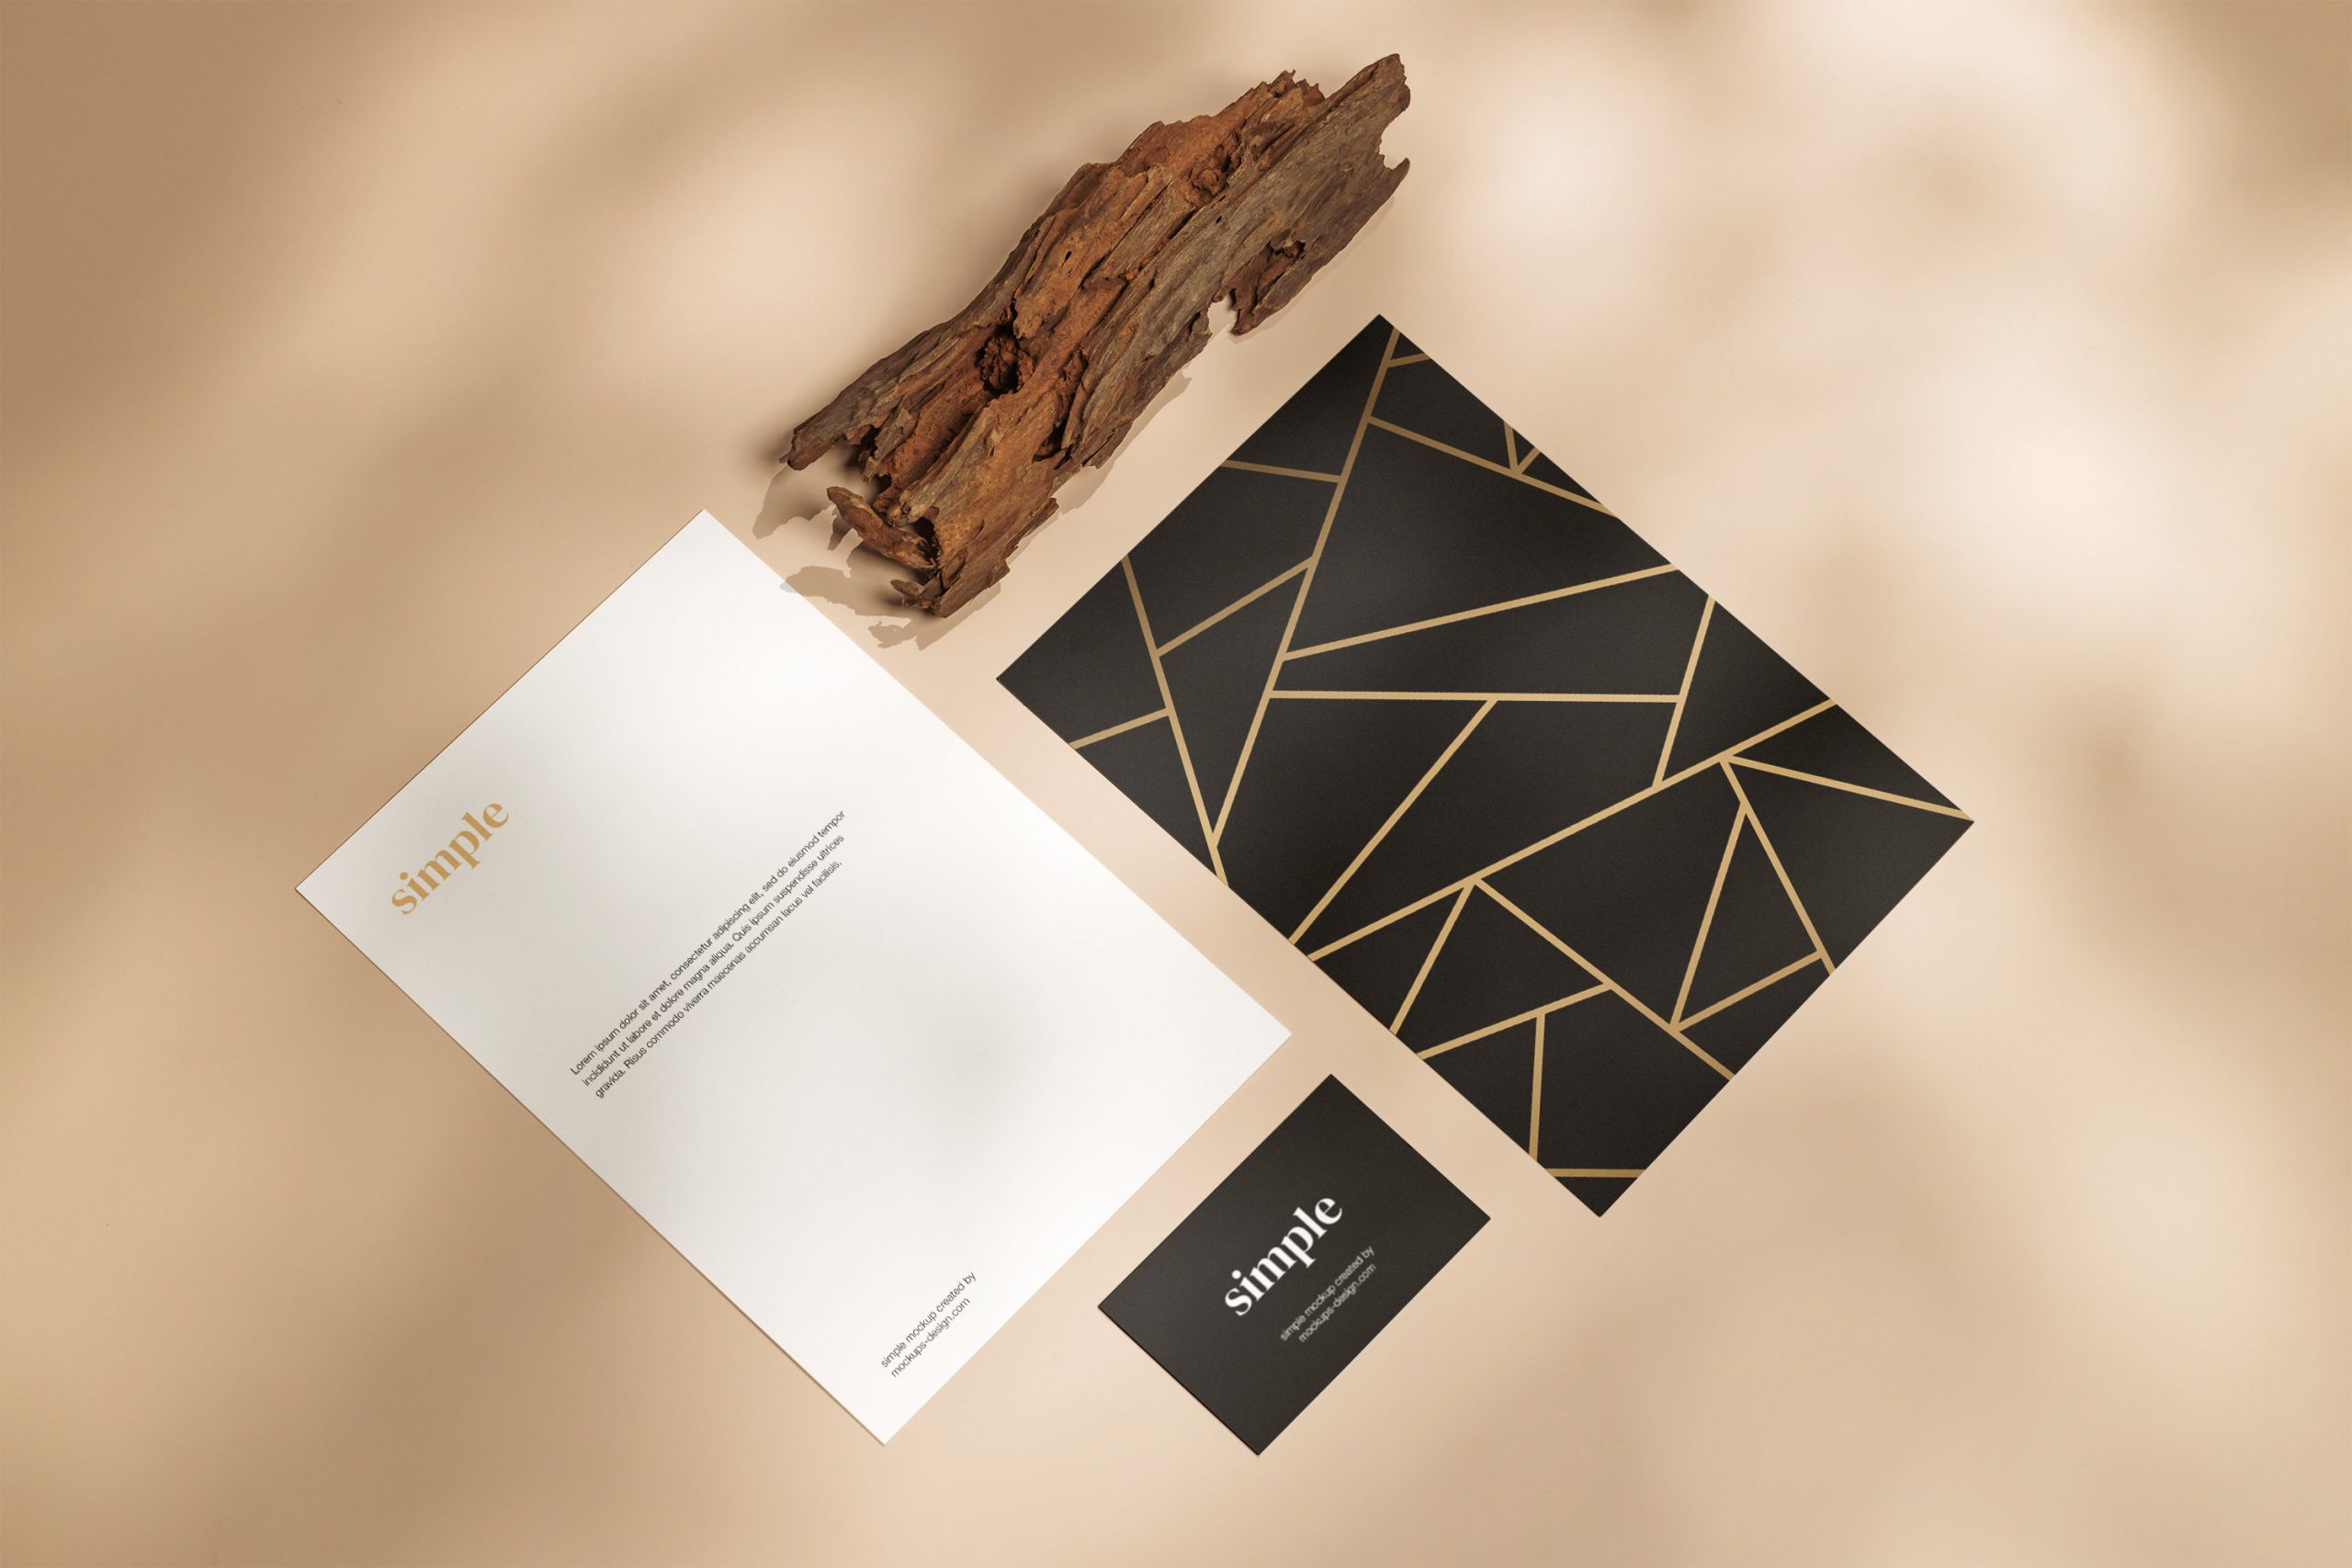 Papers with business cards mockup